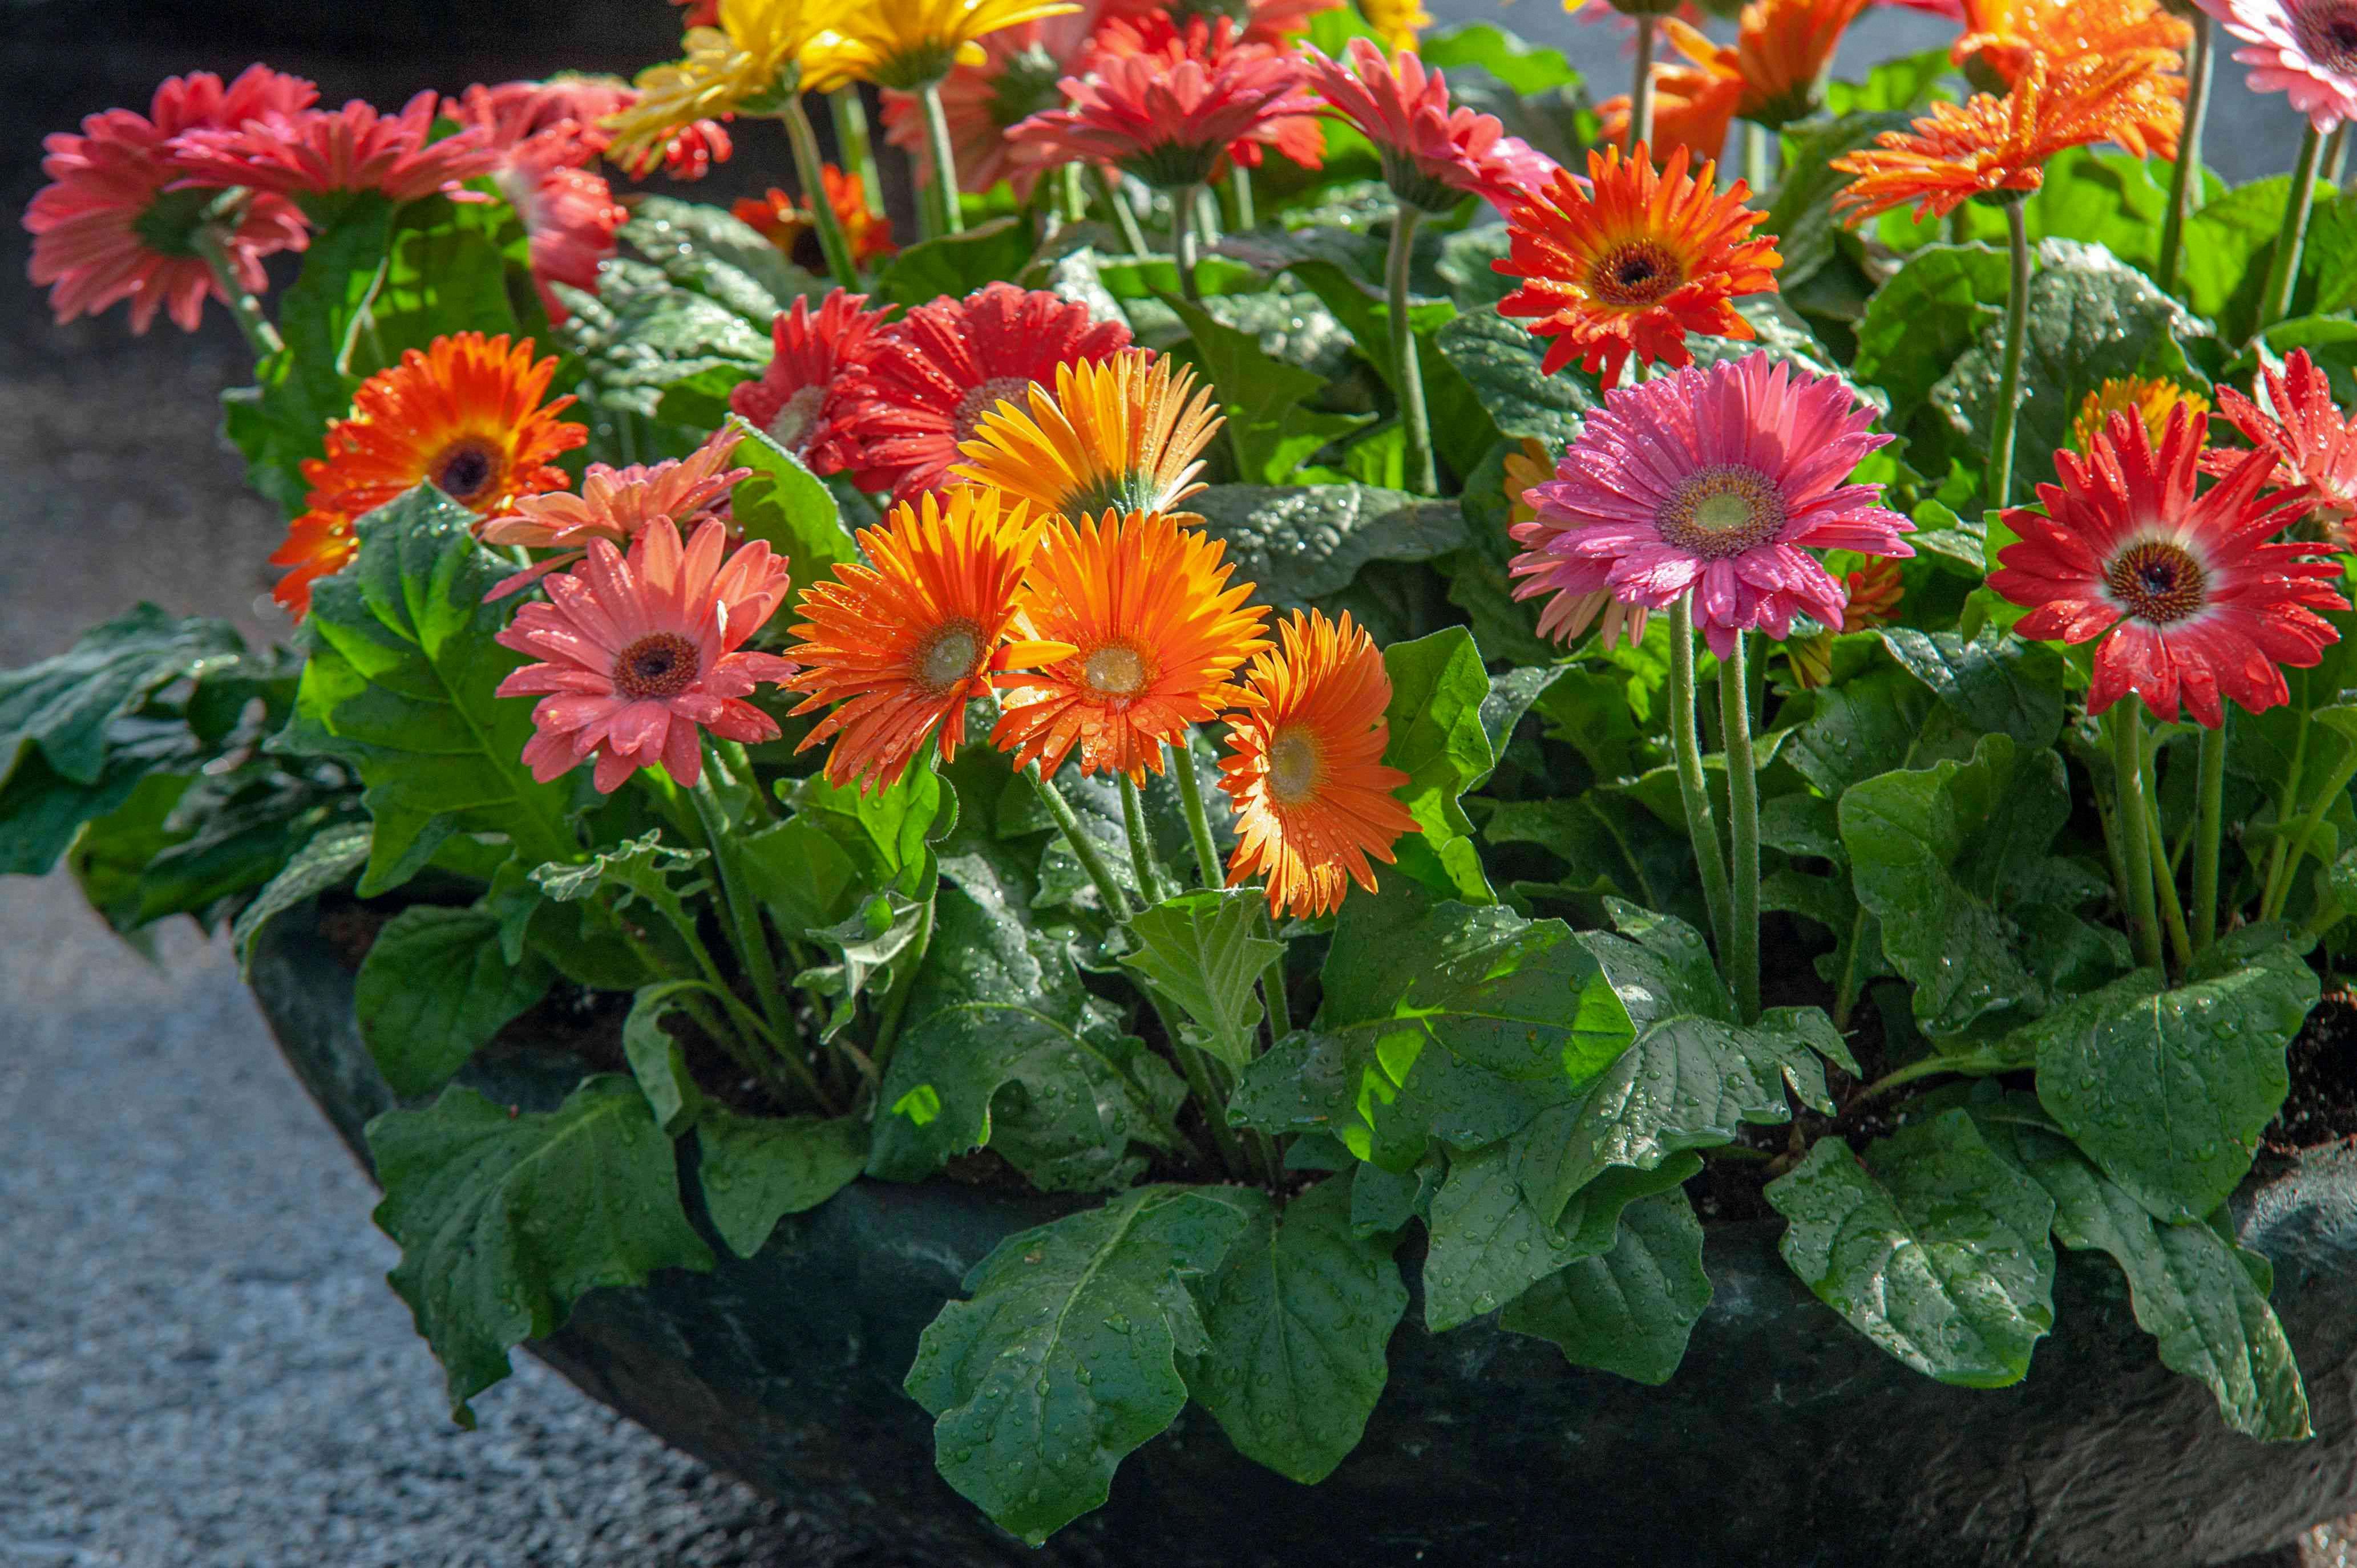 The Plight of Gerbera Daisies: Will They Make a Comeback?